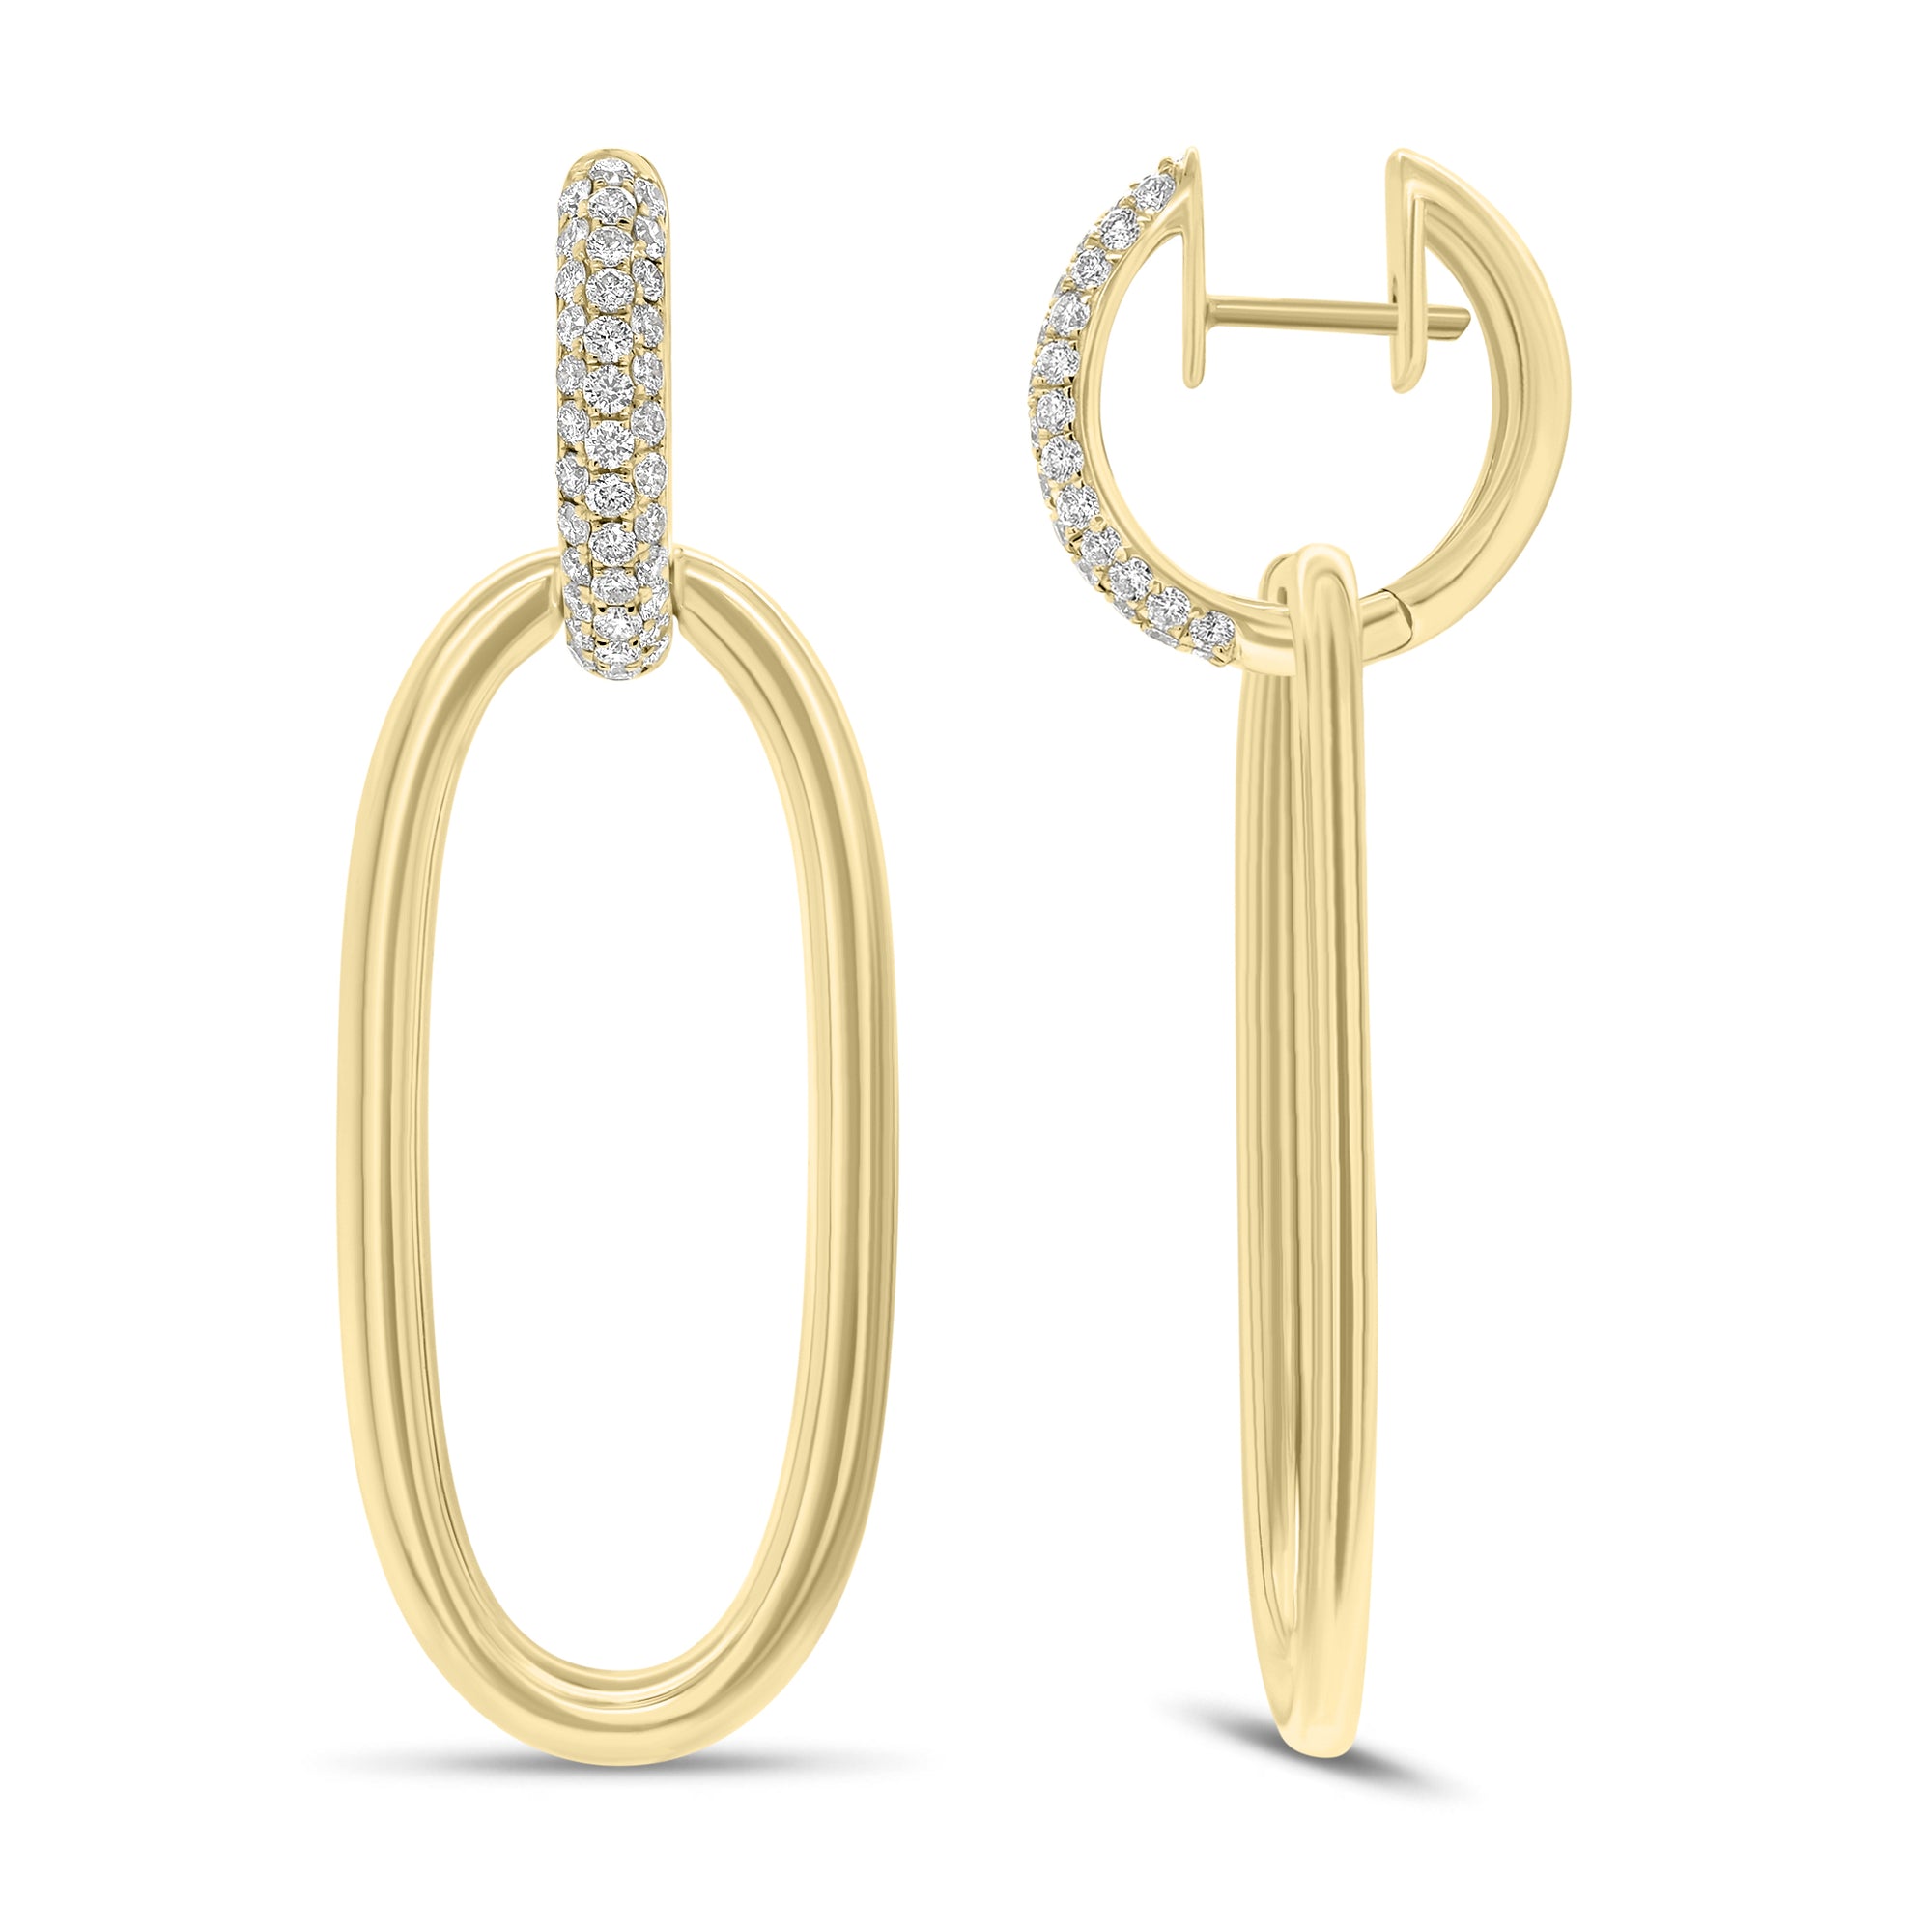 Diamond & Gold Oval Hoop Earrings - 14K gold weighing 11.98 grams  - 74 round diamonds weighing 0.88 carats